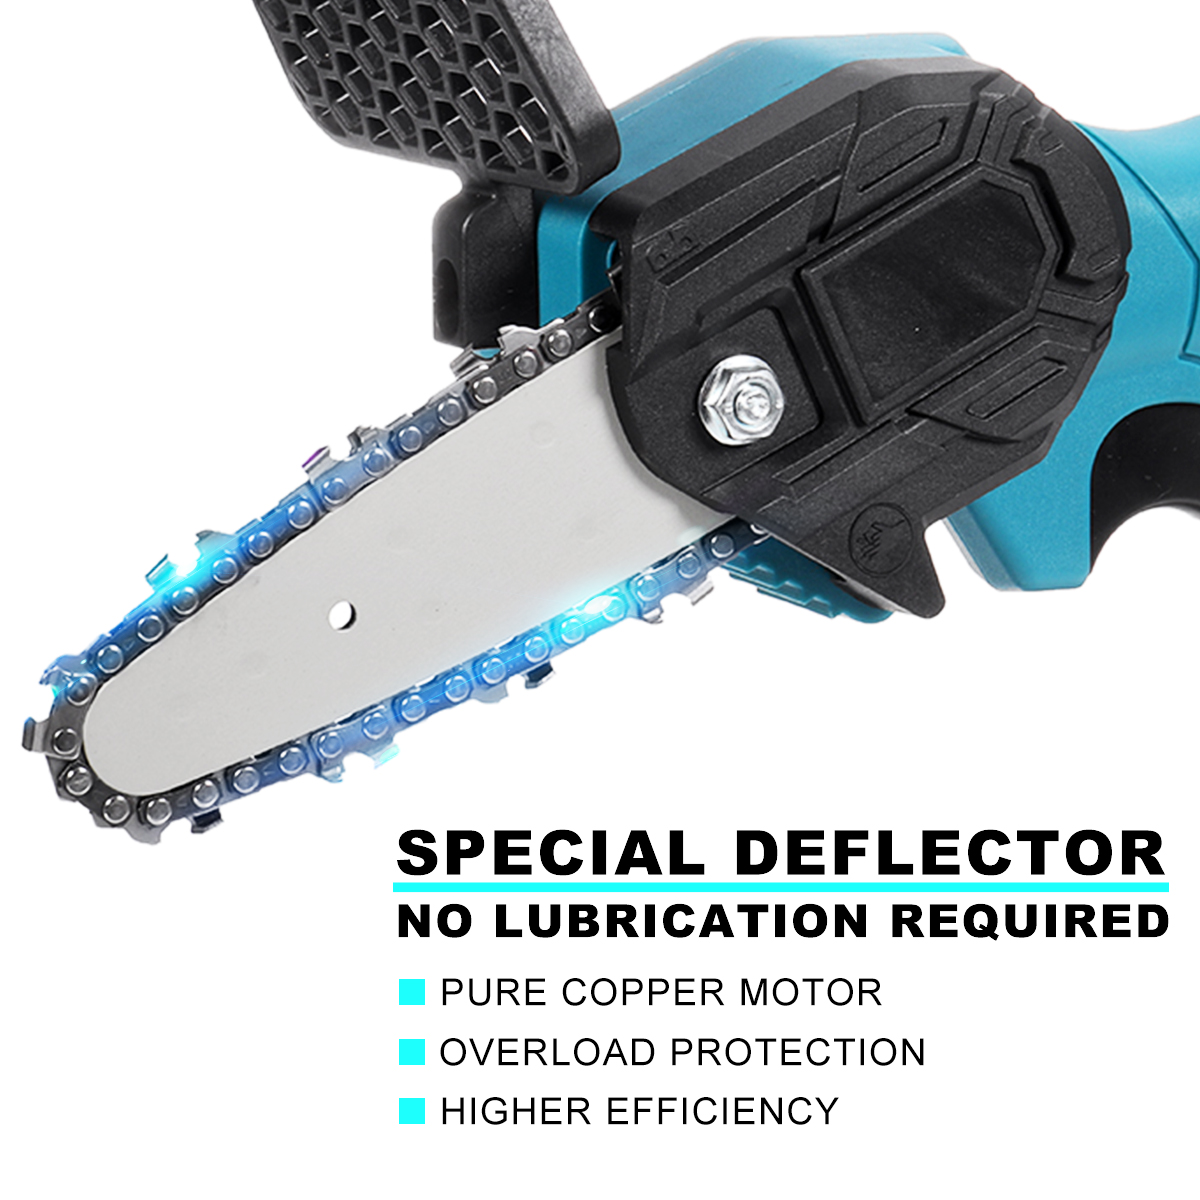 4inch-800W-48VF-Electric-Chain-Saw-Portable-Handheld-Wood-Cutter-Woodworking-Cutting-Tool-W-None1pc2-1827618-3